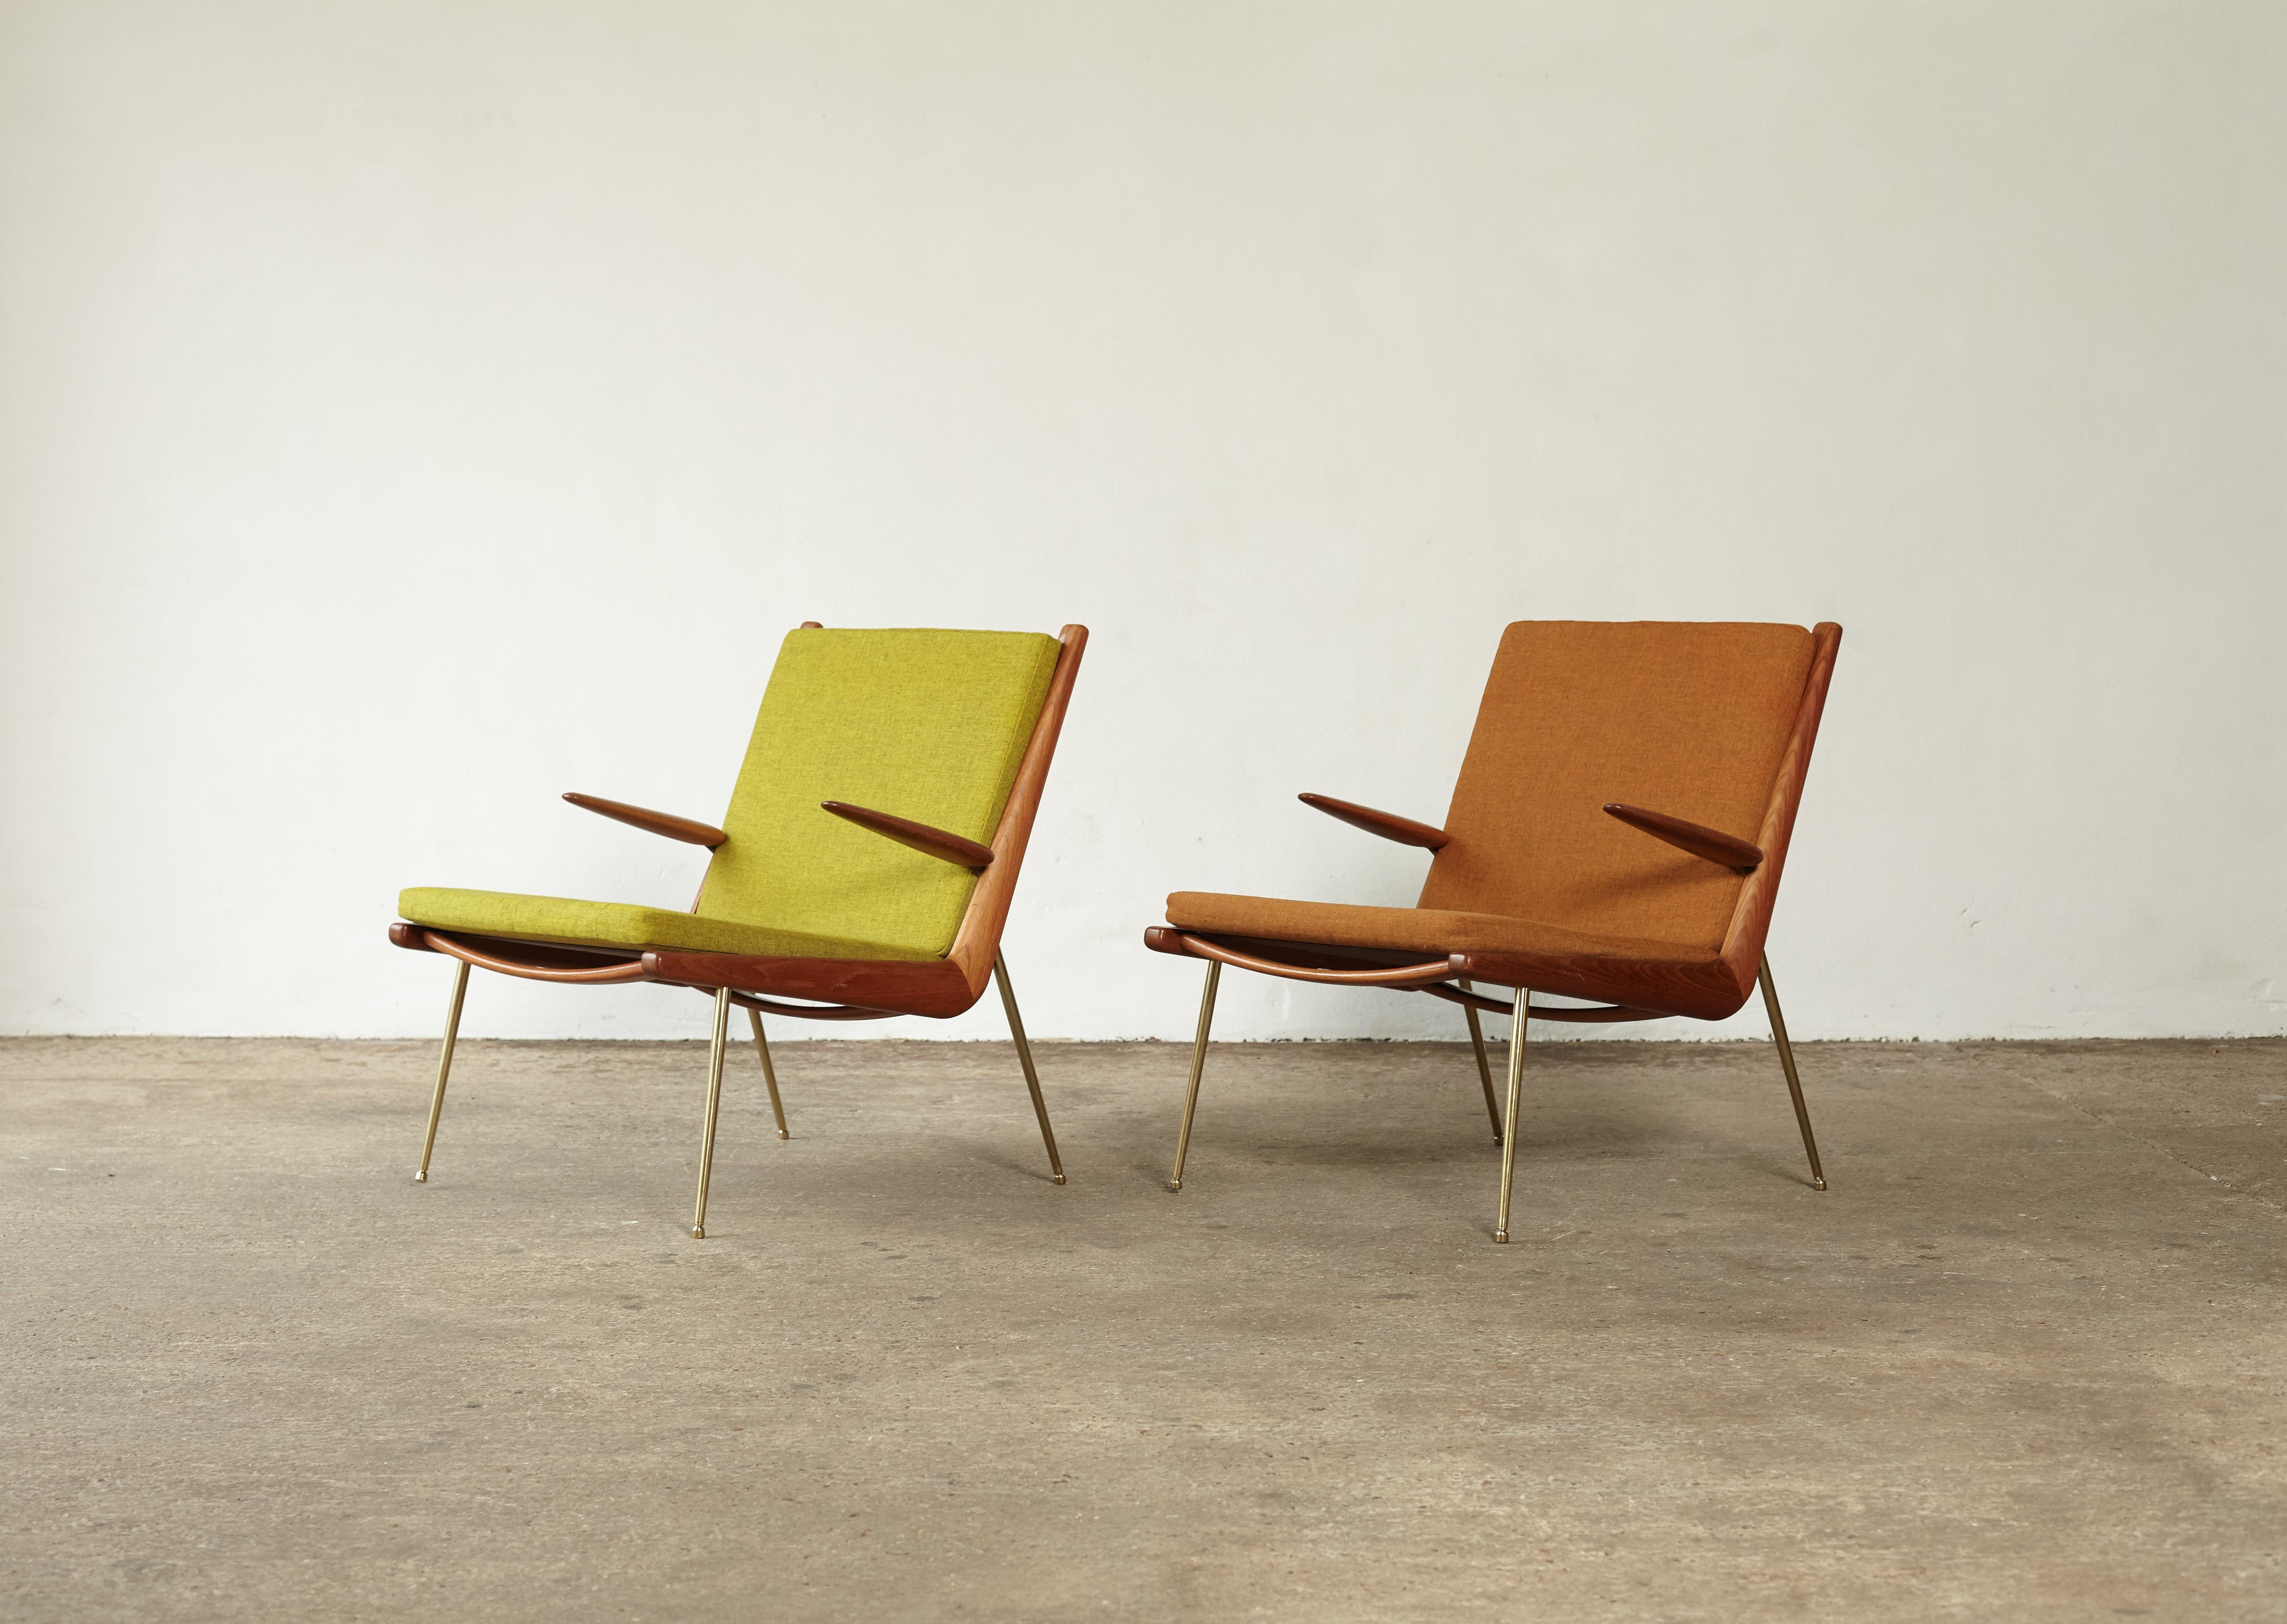 A pair of Peter Hvidt and Orla Mølgaard-Nielsen boomerang chairs for France & Søn / France & Daverkosen, Denmark, 1960s. Cushions are loose and easy to recover in a different fabric if desired, we can assist with this if required.